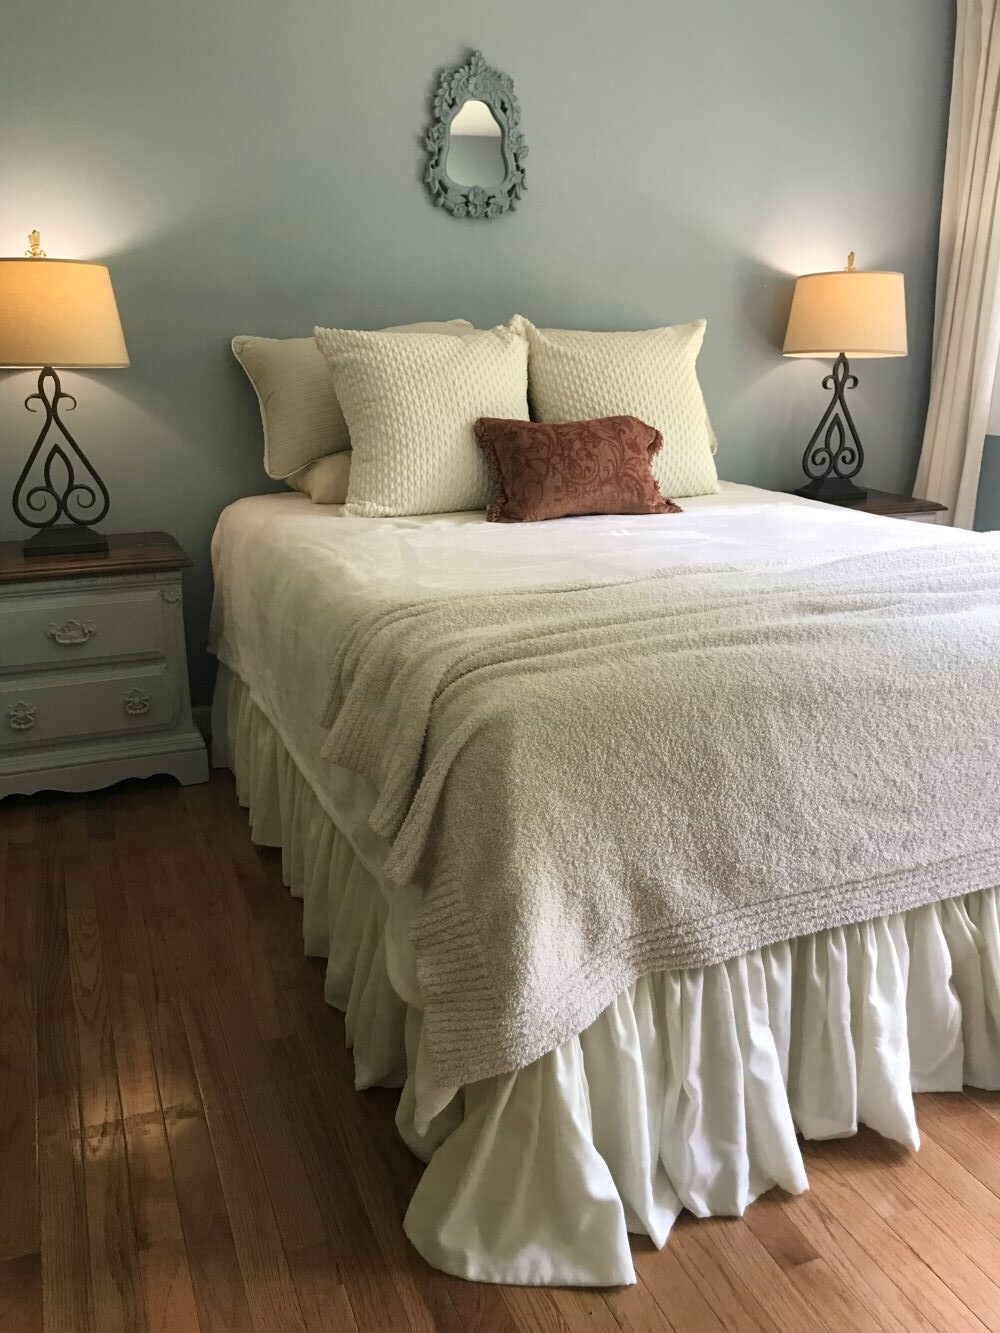 master bedroom bed with nightstands and lamps